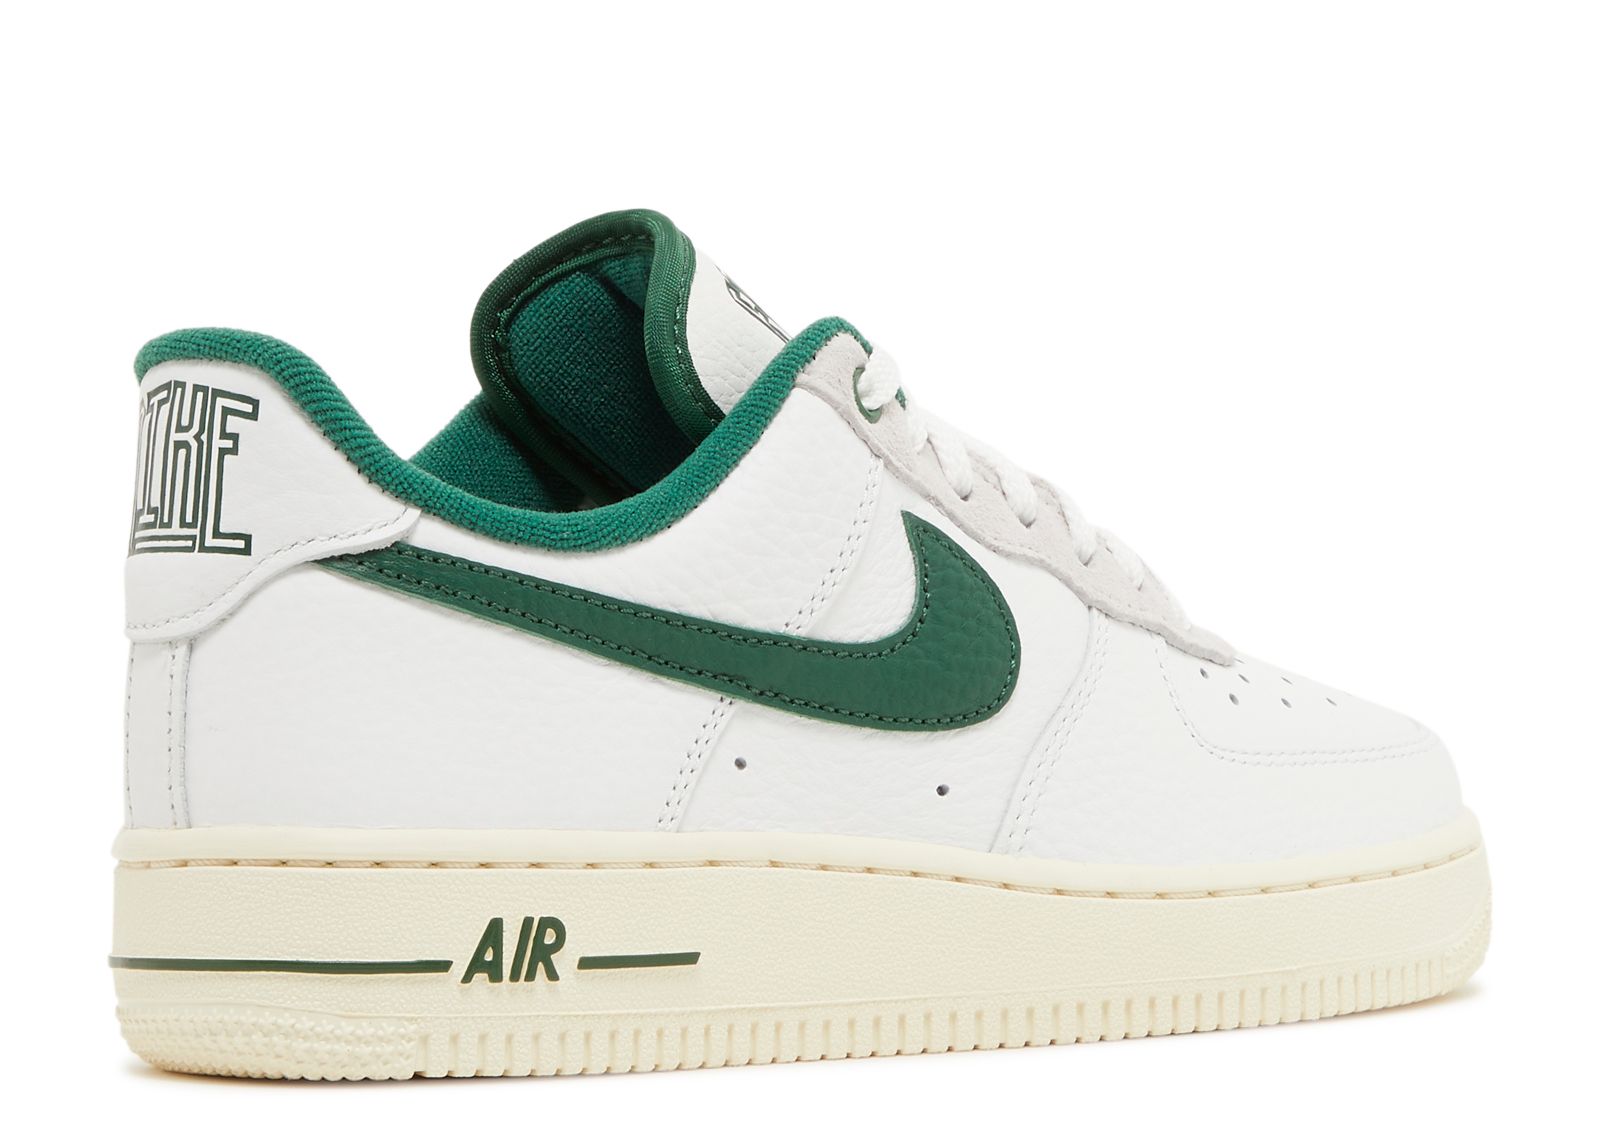 Wmns Air Force 1 '07 LX 'Command Force Gorge Green' - Nike